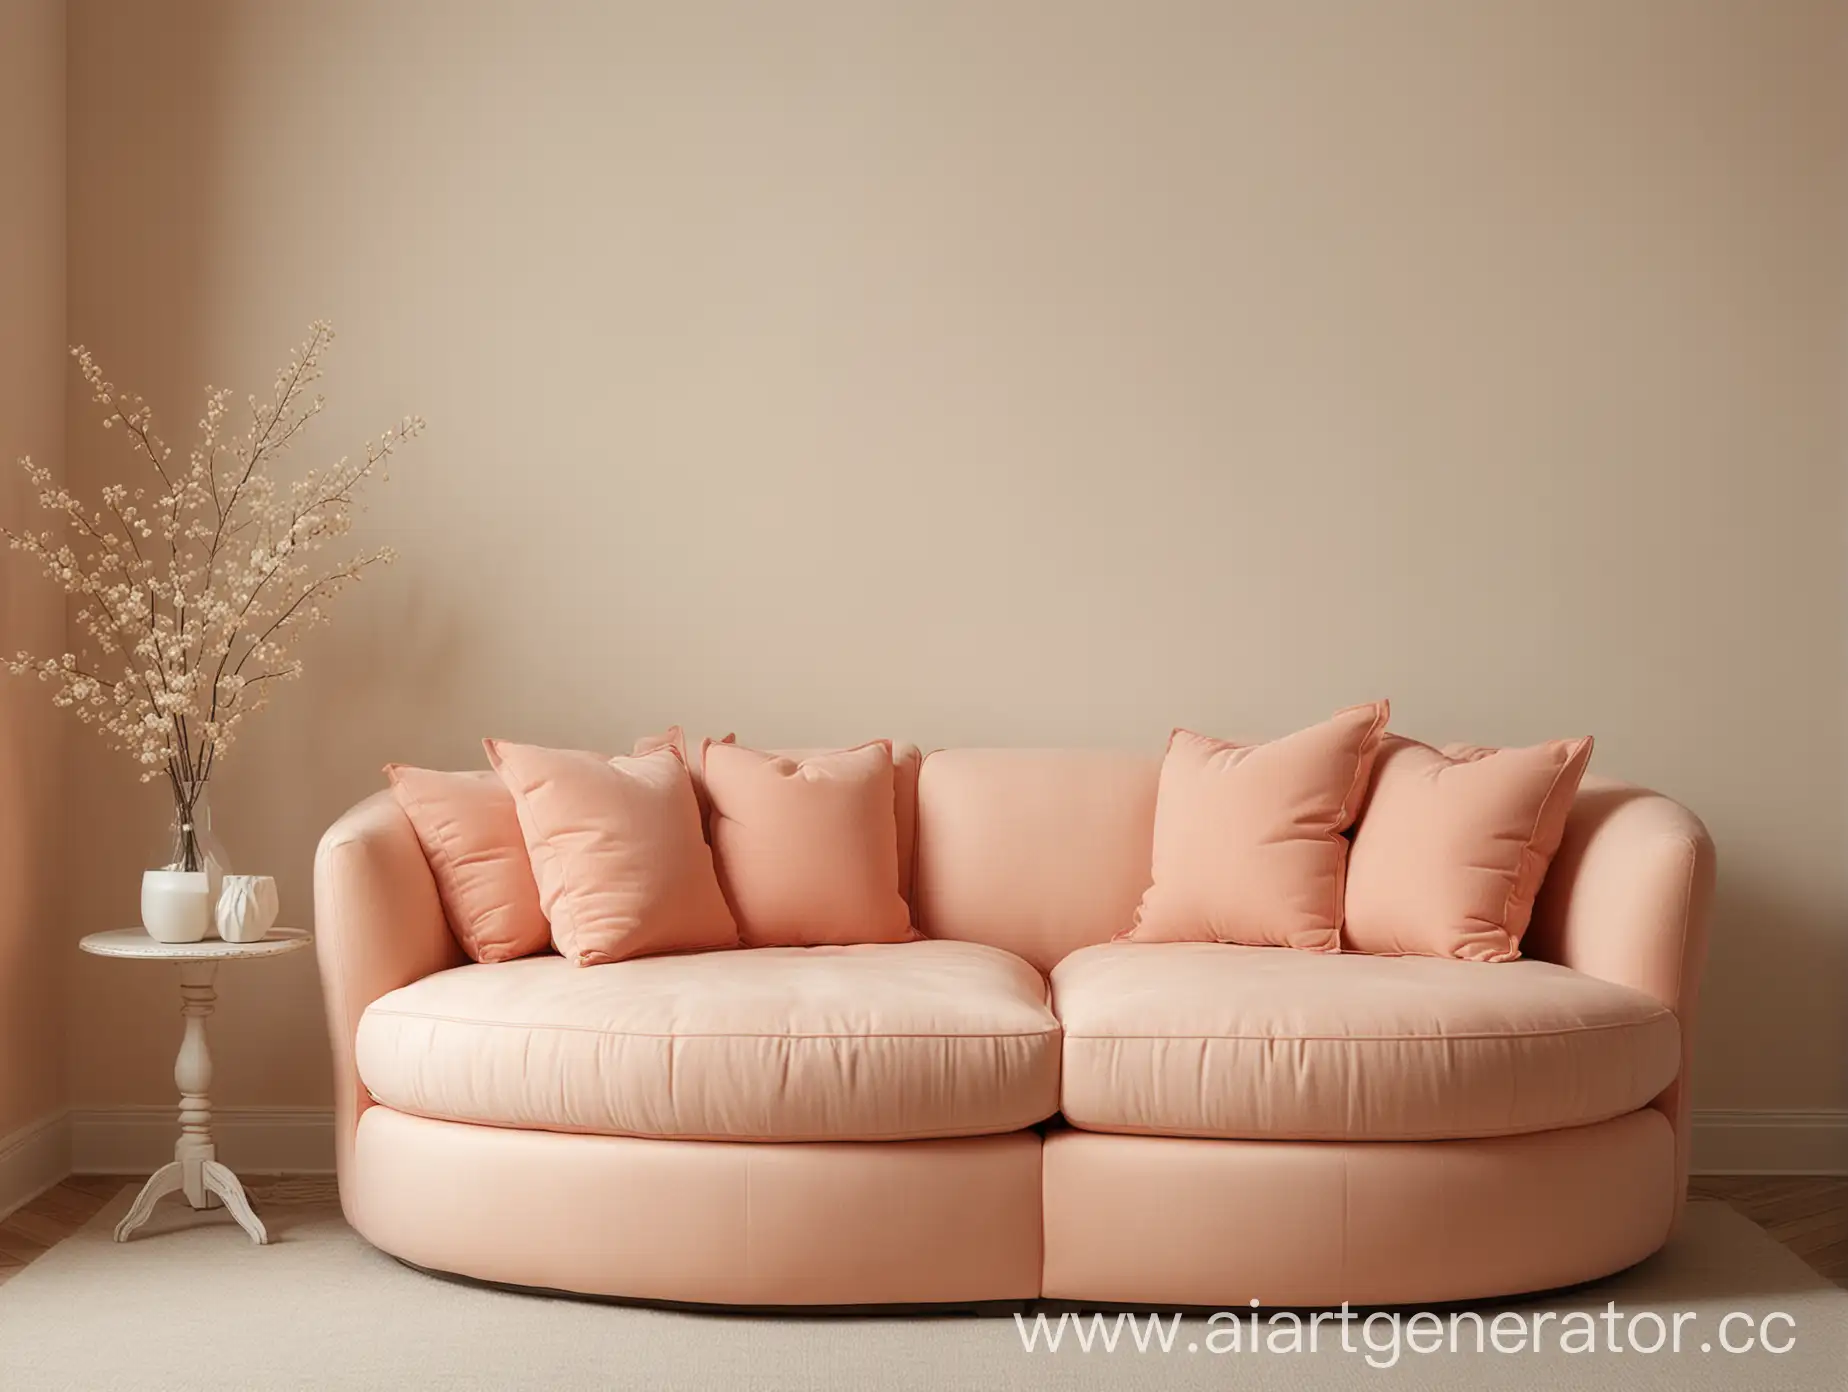 Coral-Color-Round-Sofa-with-Pillows-Against-Ivory-Wall